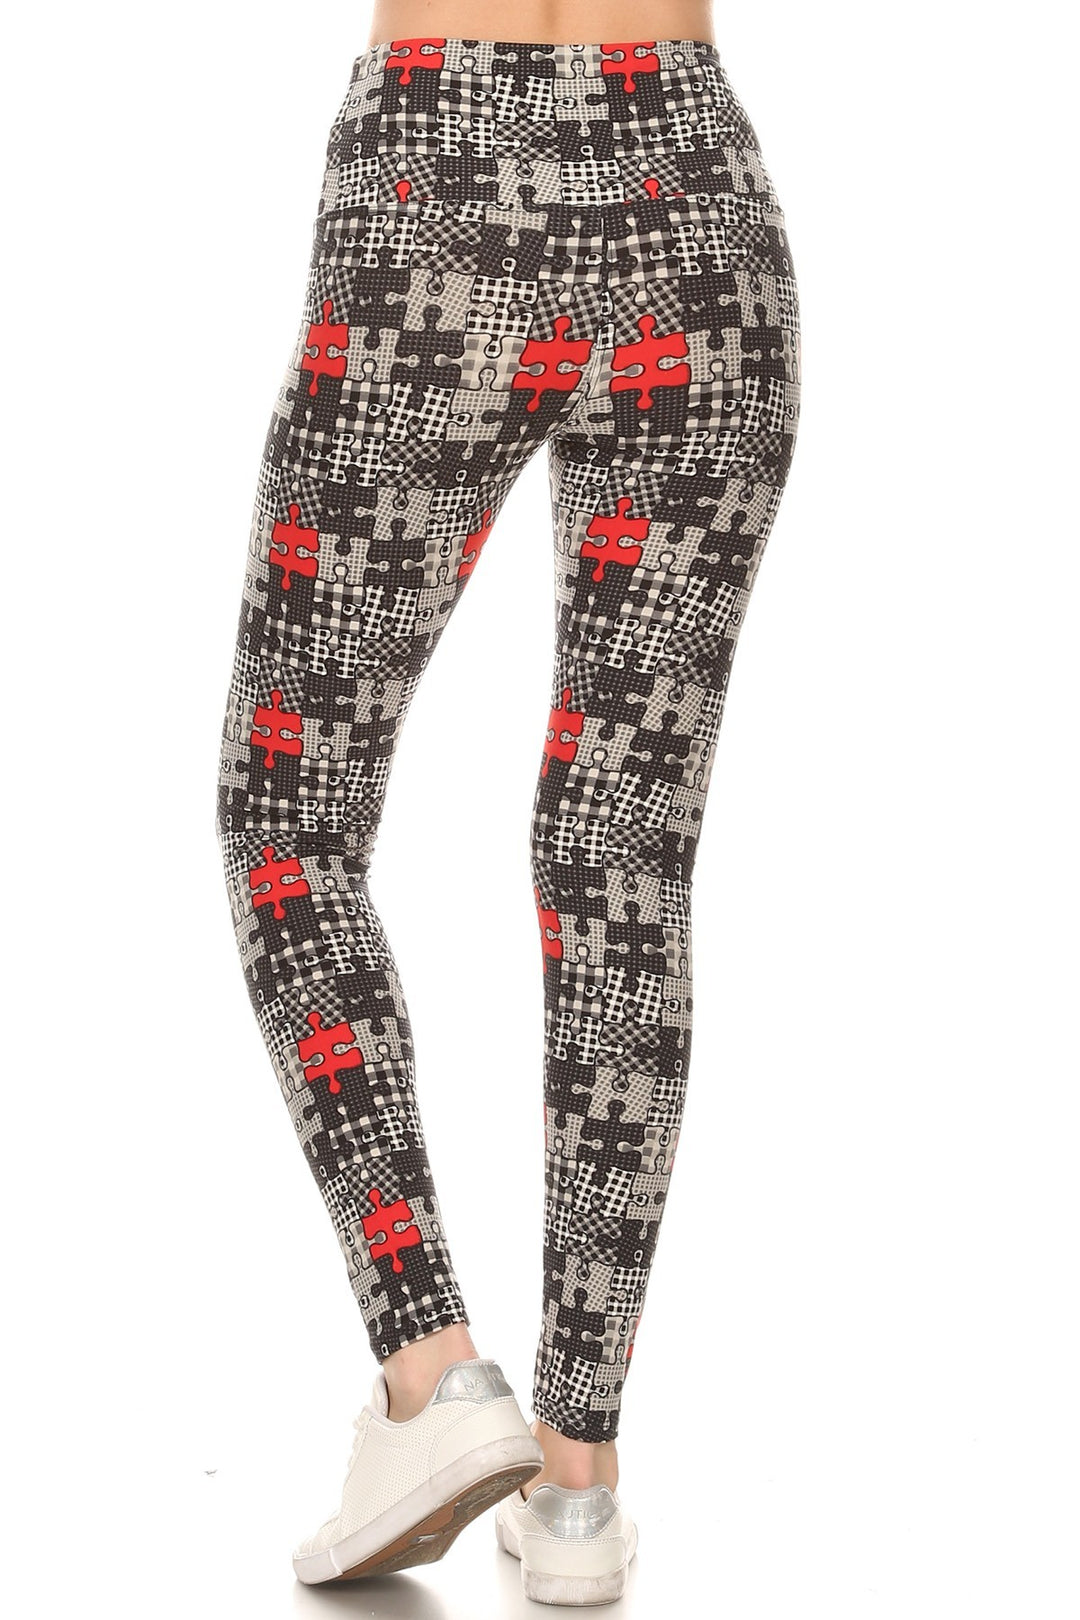 5-inch Long Yoga Style Banded Lined Puzzle Printed Knit Legging With High Waist - bertofonsi